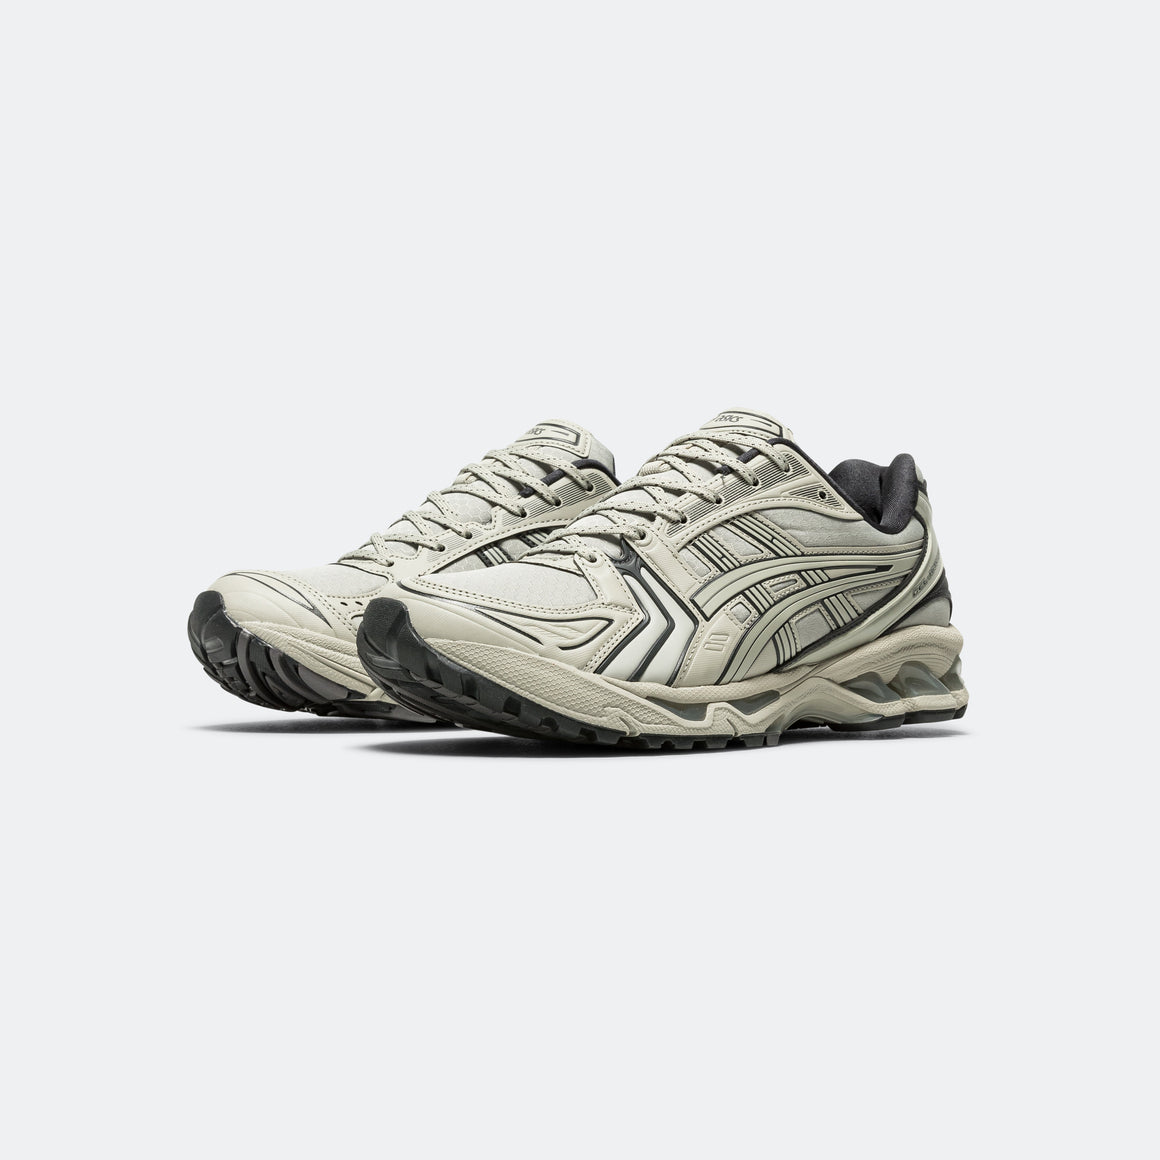 Asics - GEL-Kayano 14 Earthenware - White Sage/Graphite Grey - UP THERE